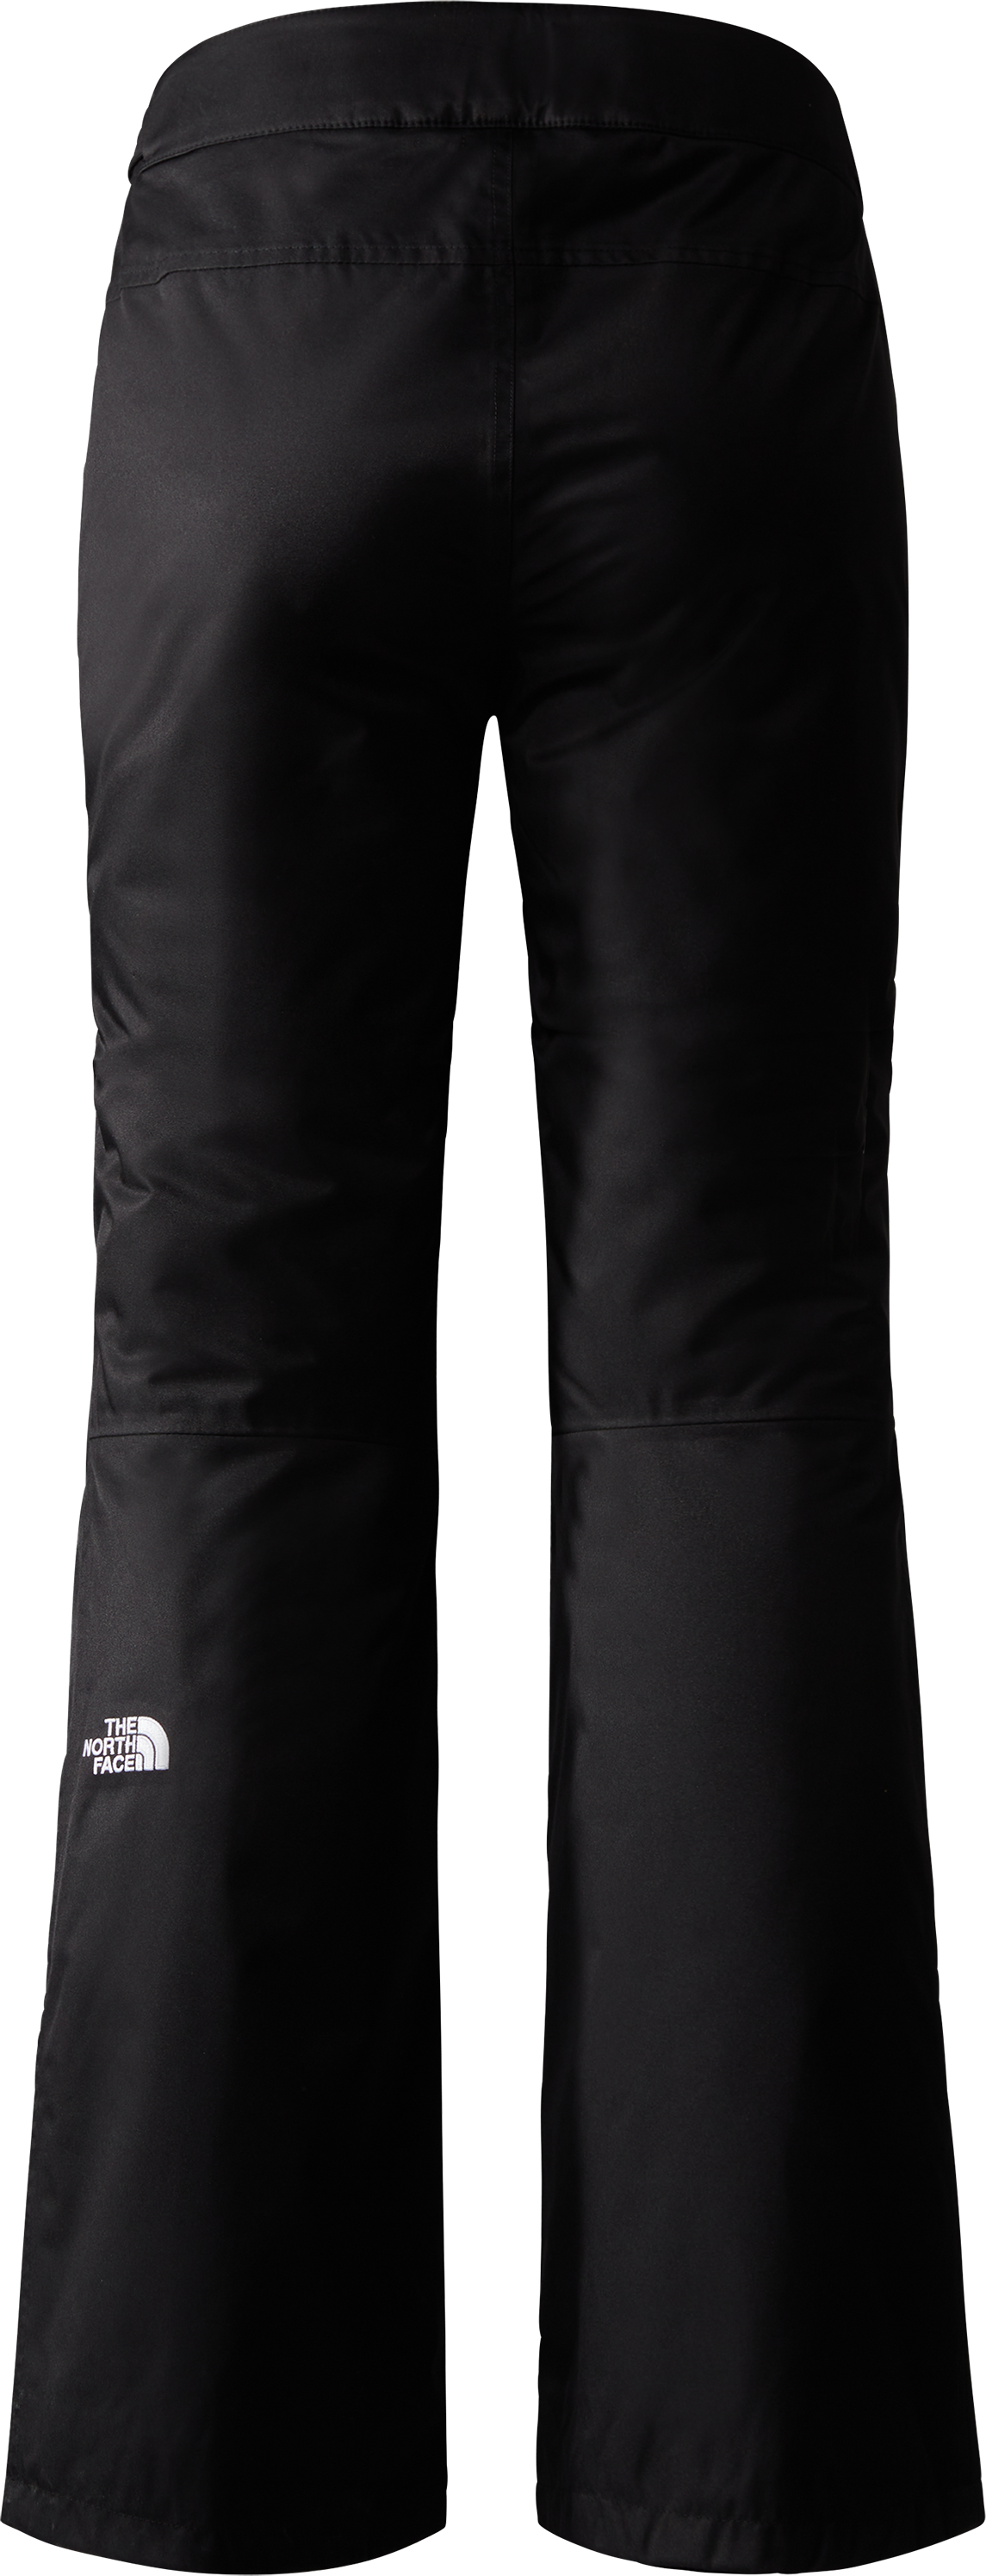 https://www.fjellsport.no/assets/blobs/the-north-face-women-s-sally-insulated-pant-tnf-black-bb616b752c.png